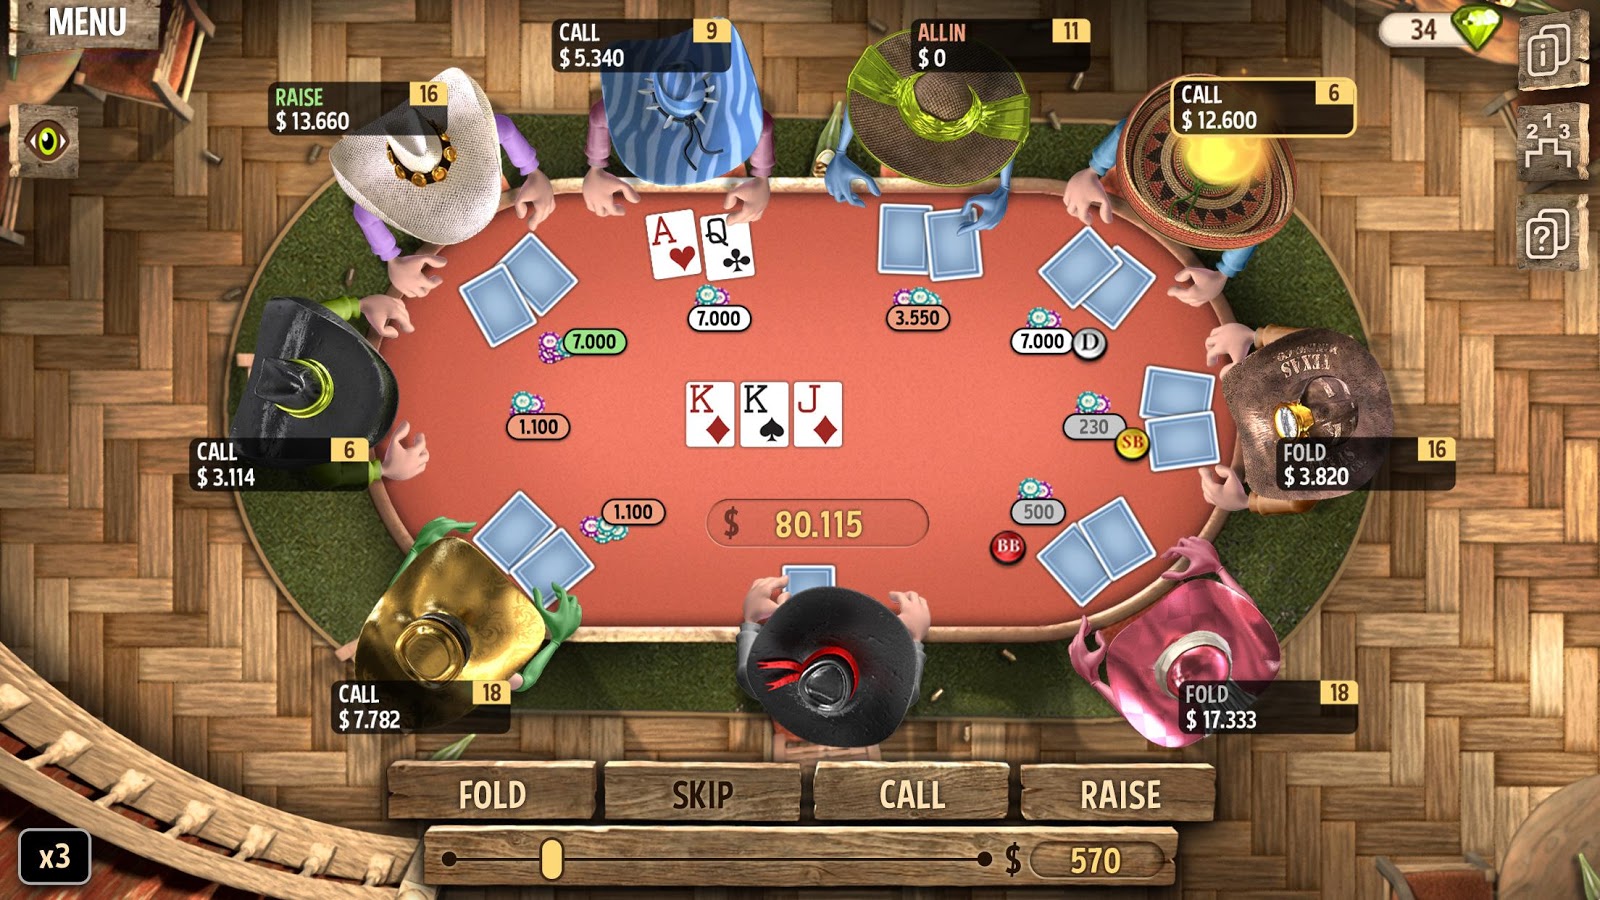 Governor of poker 2 full version free download for mac